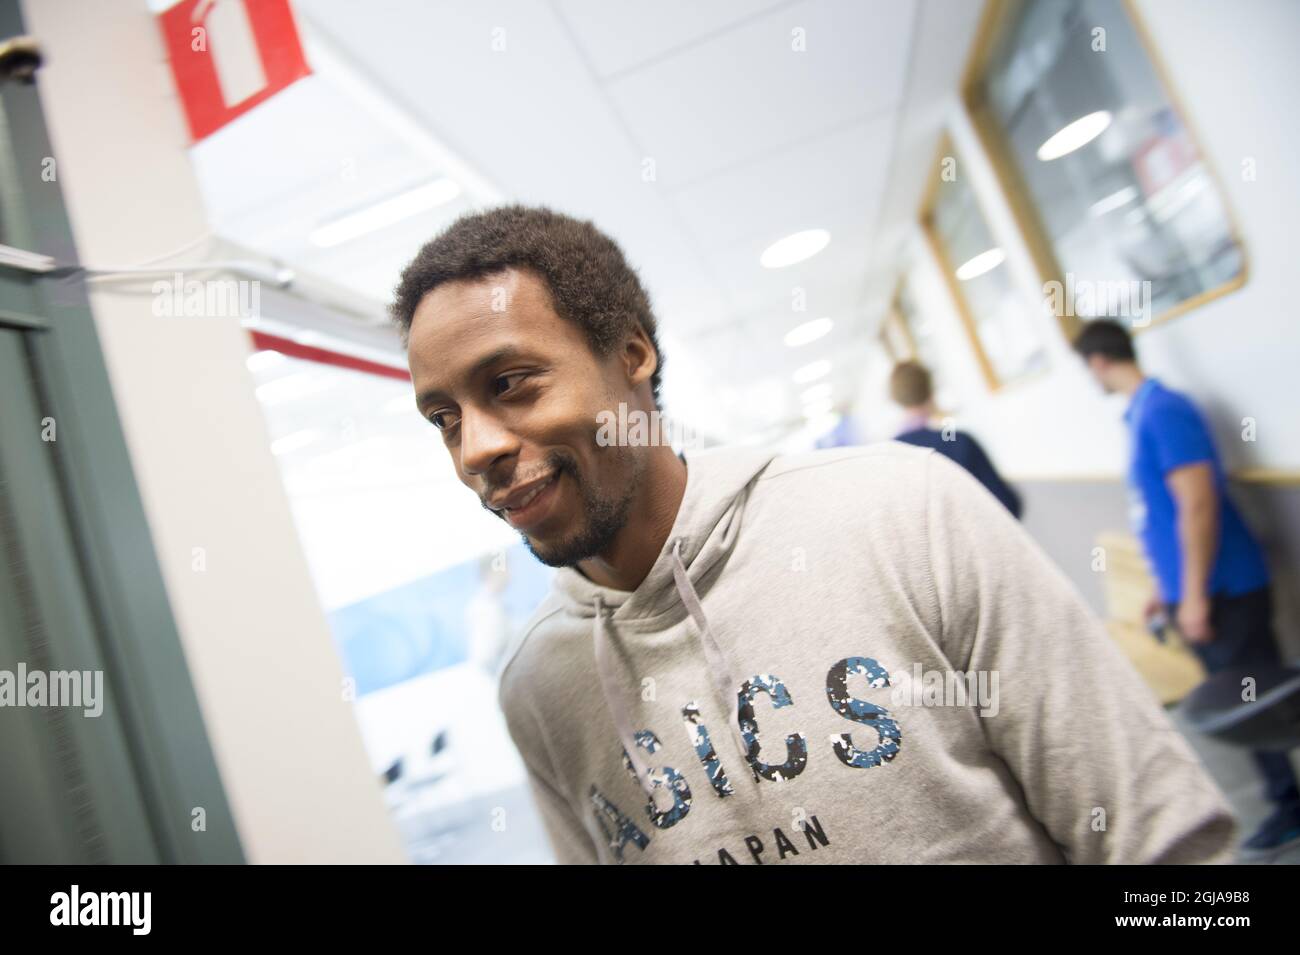 The French tennis player Gael Monfils after the press conference during the tennis tournament Stockholm Open held at Kungliga Tennishallen in Stockholm, Sweden October 18, 2016. Photo: Fredrik Sandberg / TT / Kod 10080  Stock Photo